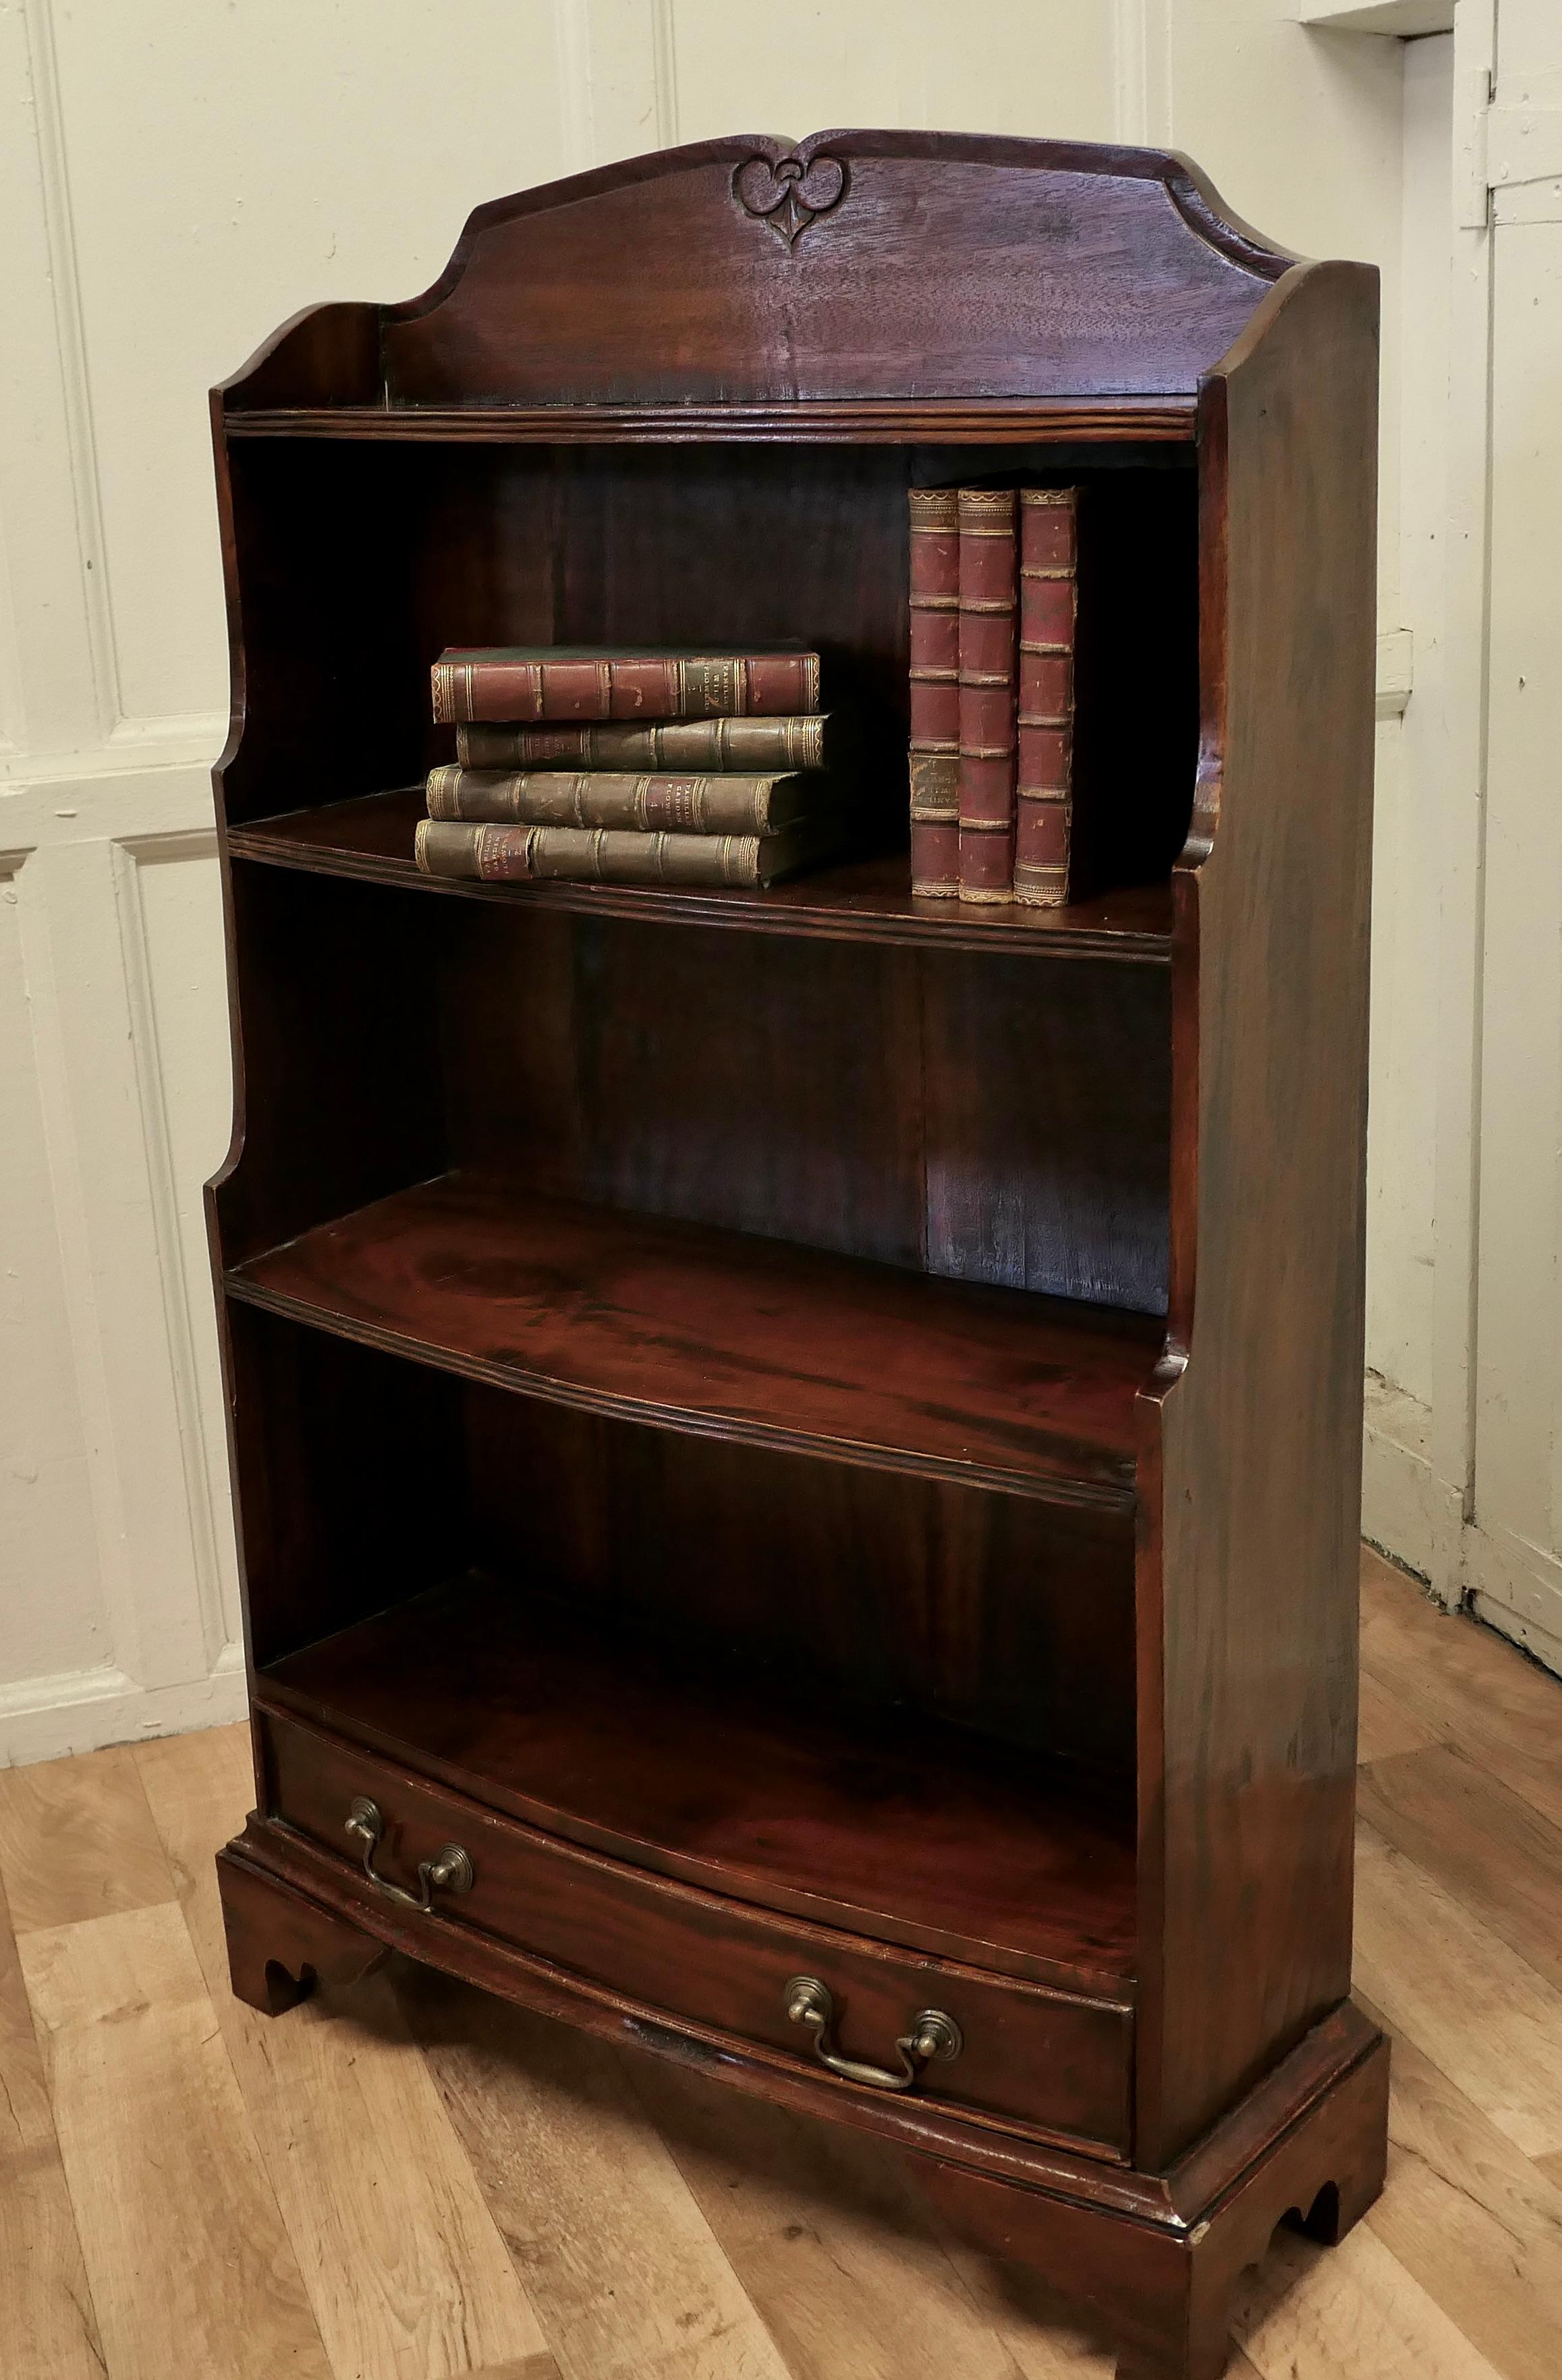 Bow front open bookcase with drawer

This is an excellently designed piece, it is in the Georgian country style, with a shaped back board and a bottom drawer

The book case has fixed shelves these are reeded along the front and it stands on